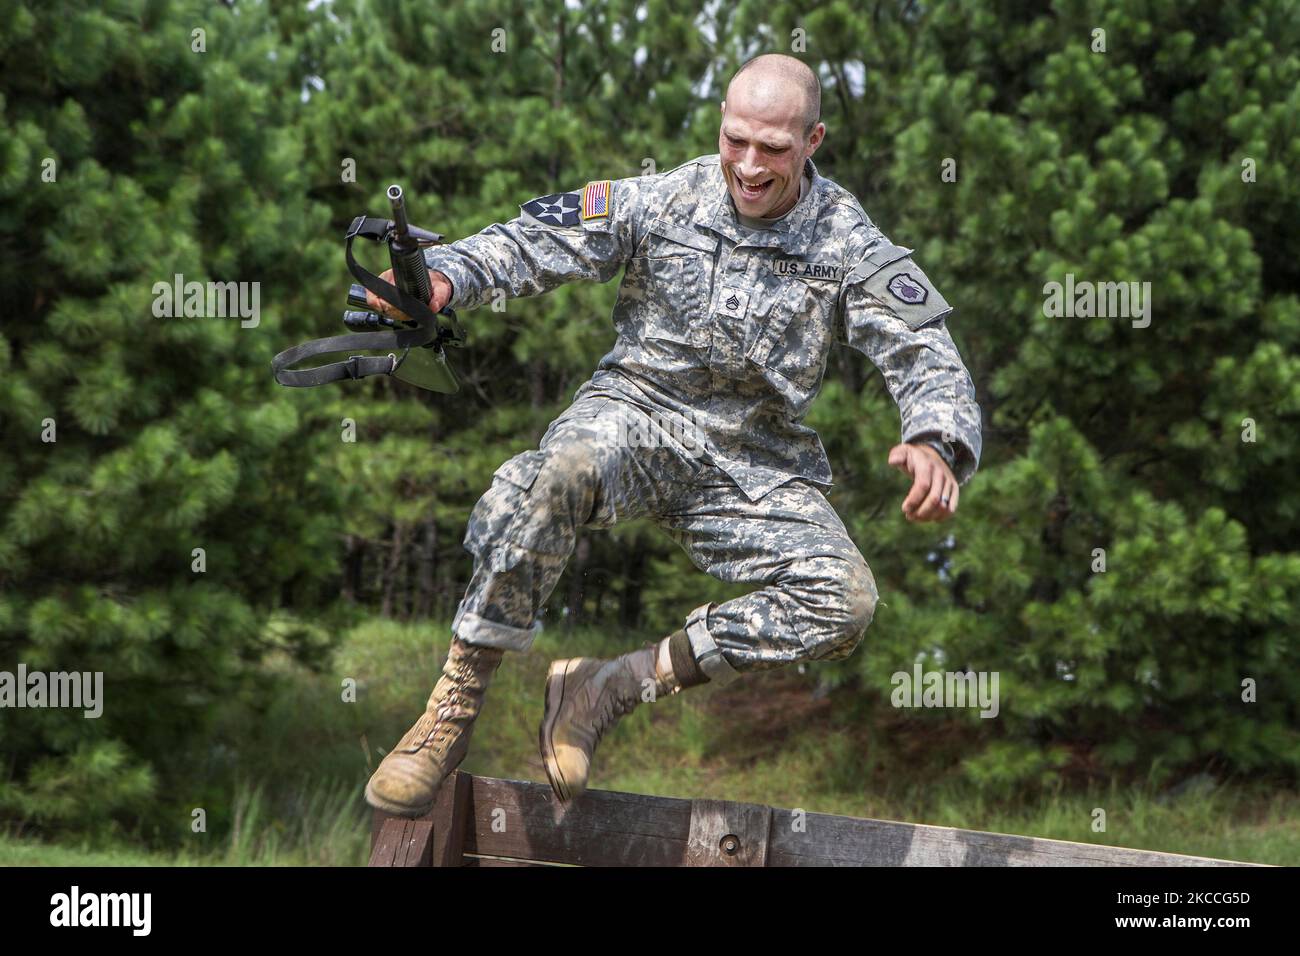 U.S. Army Soldier leaps over the wall at an obstacle course. Stock Photo